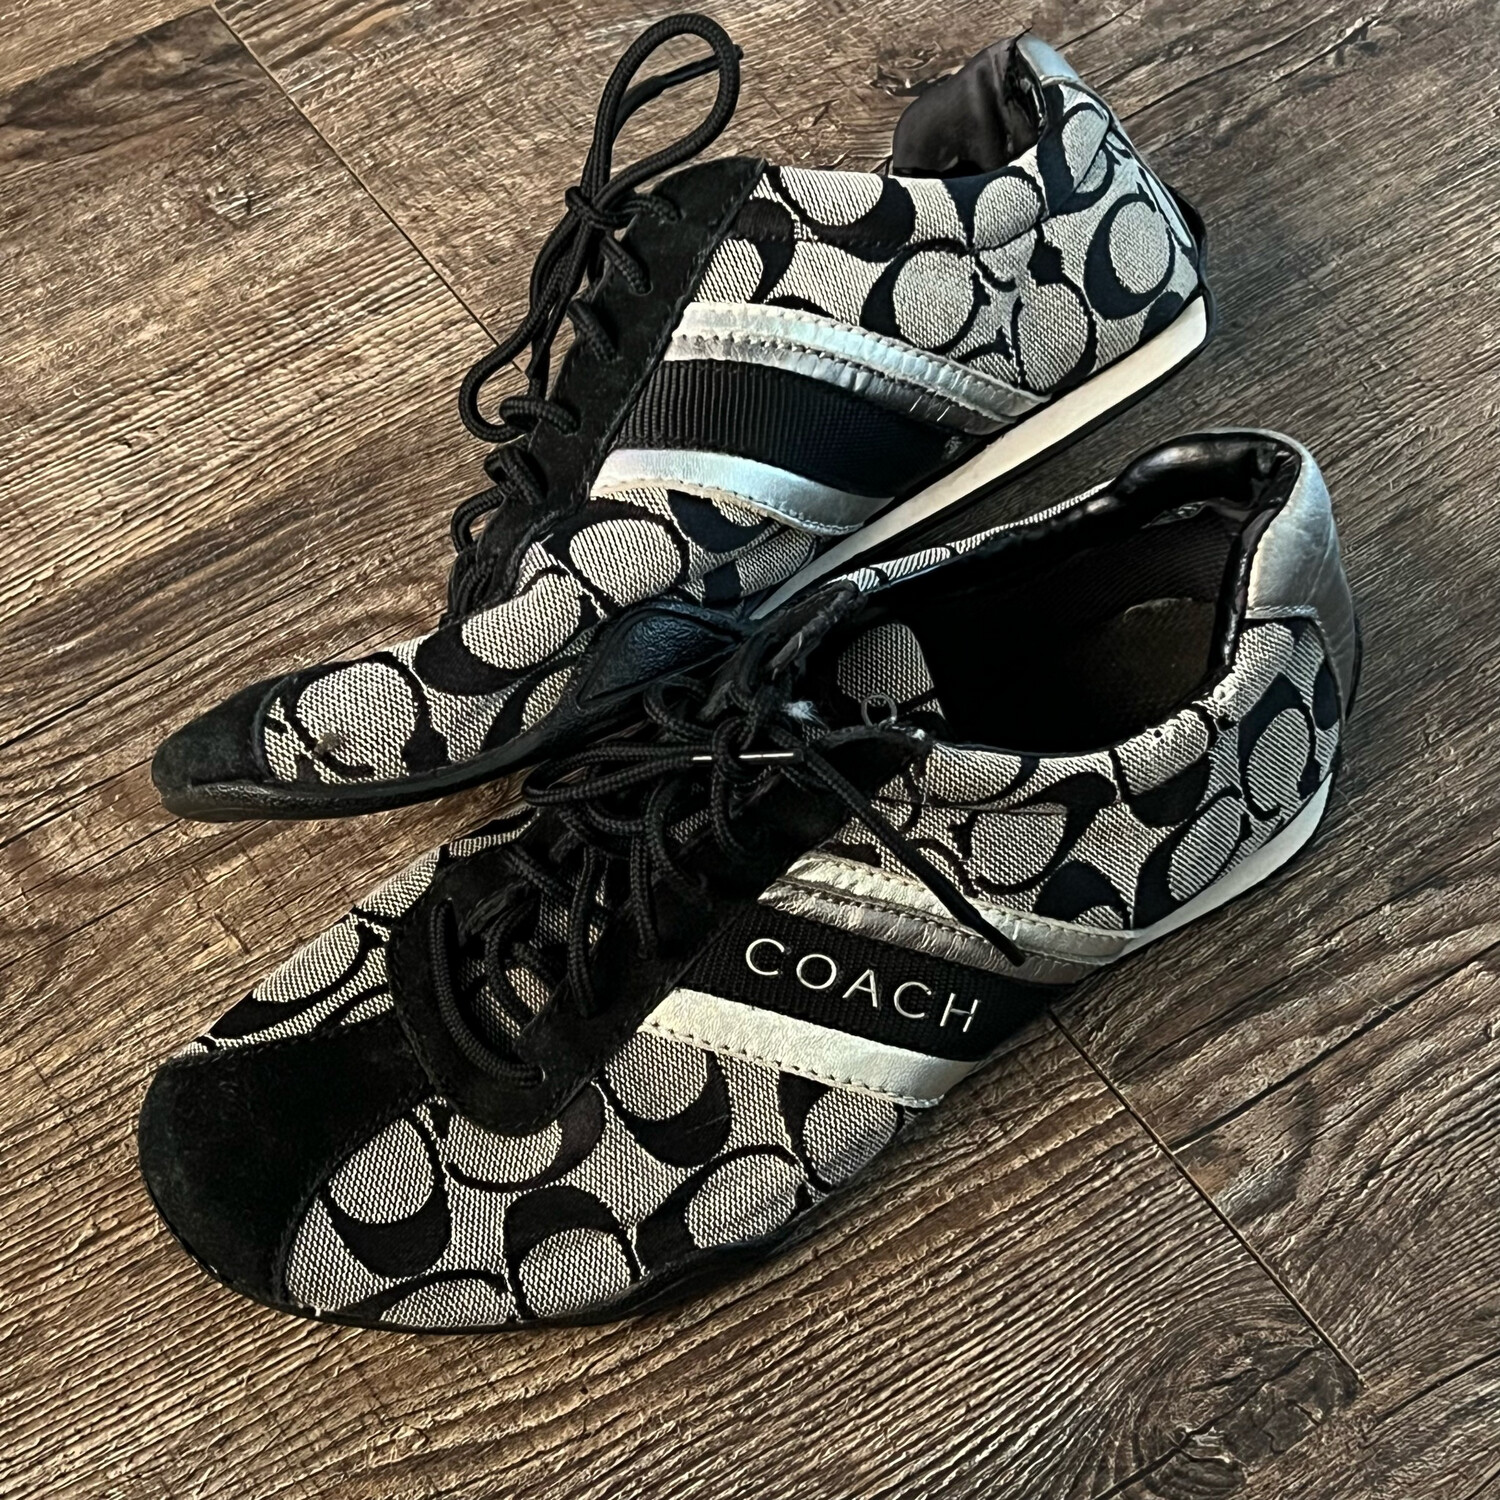 COACH Jayme Sneakers. Free Shipping